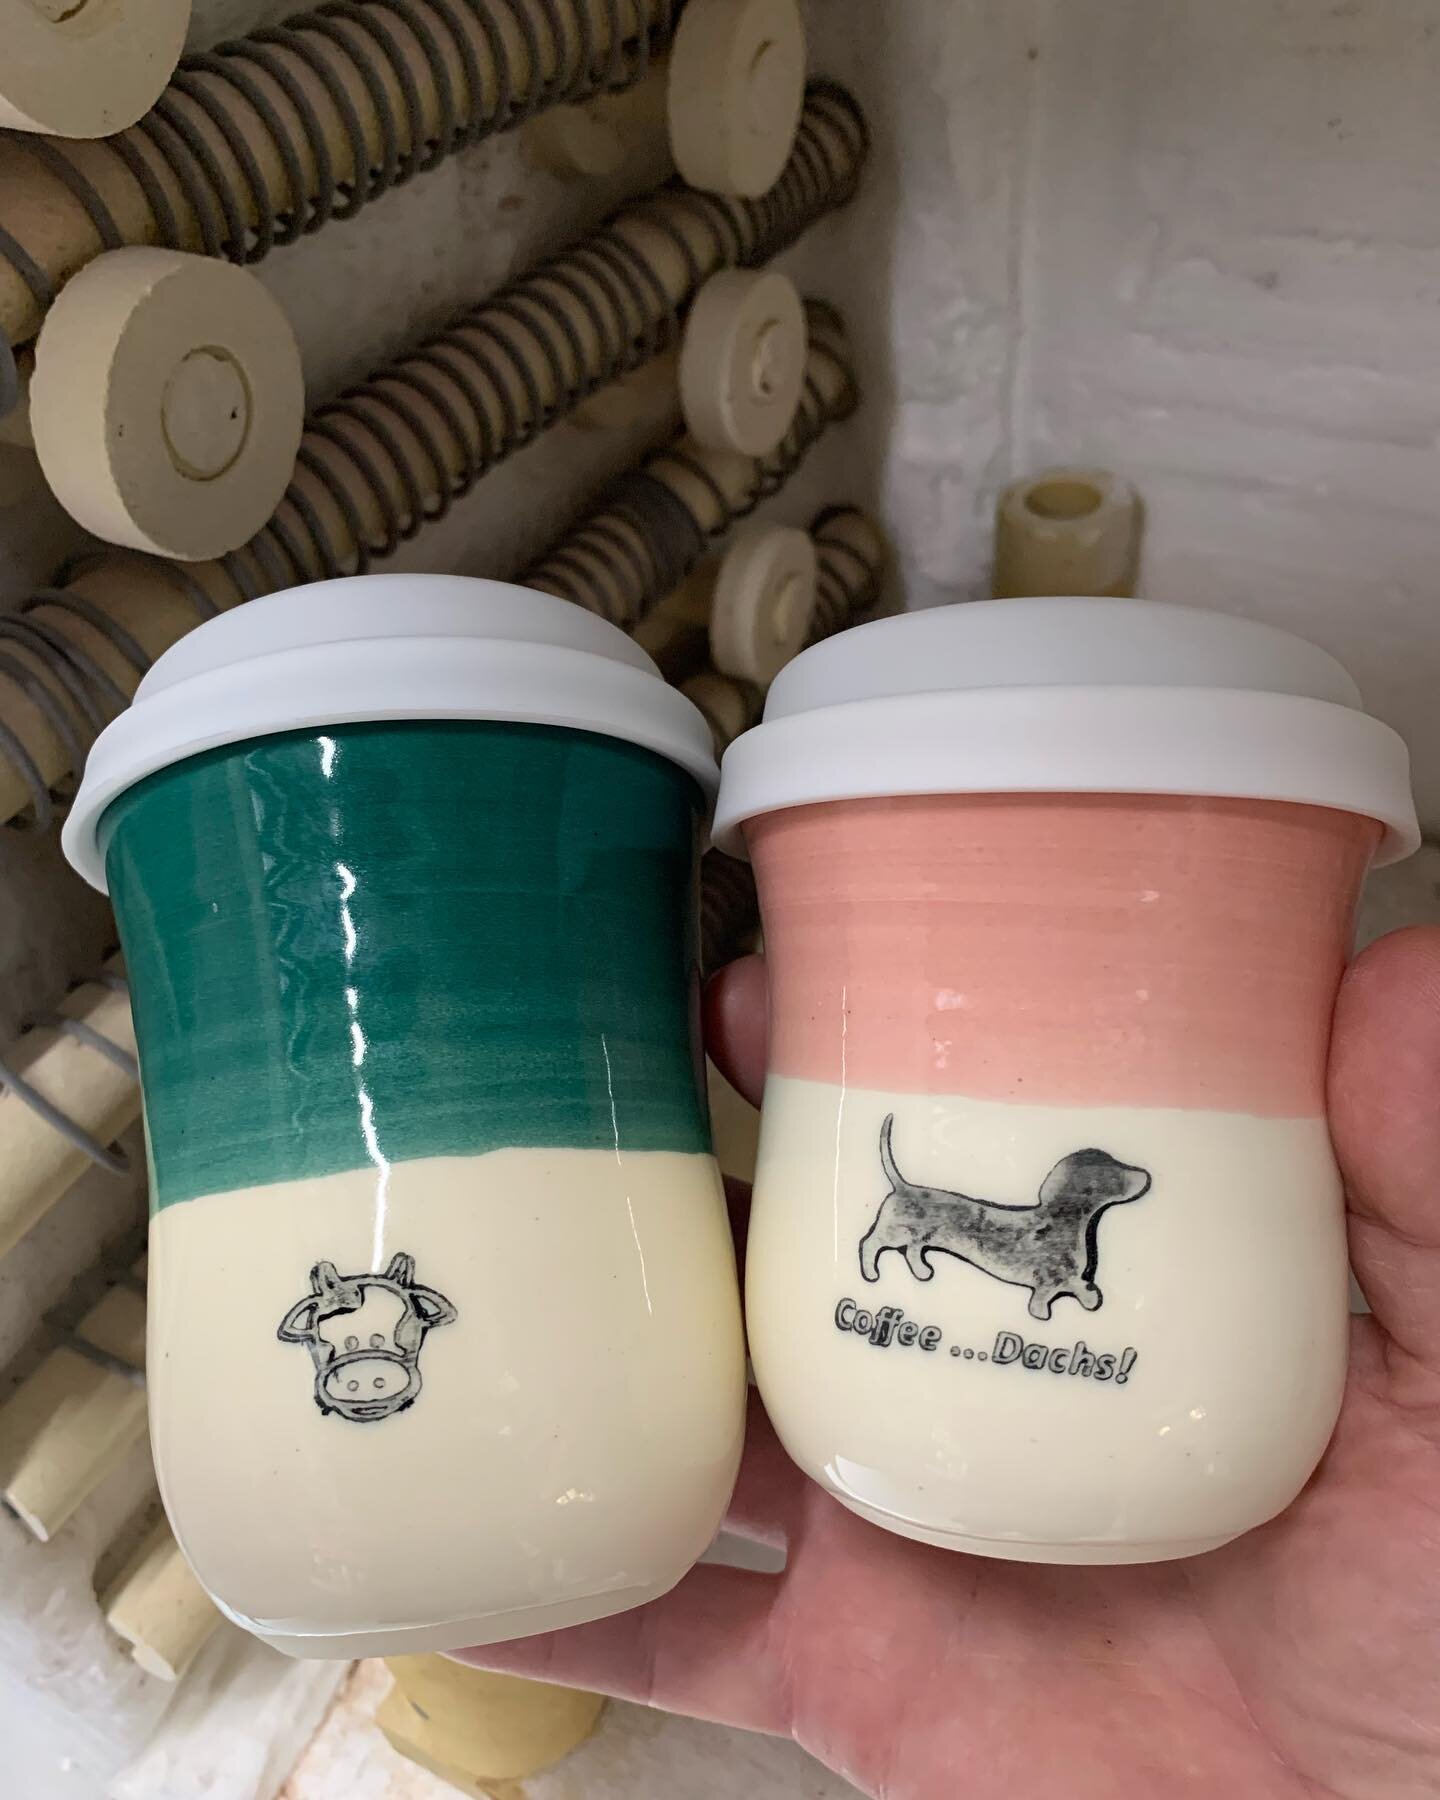 Always popular Mr Moo &amp; Coffee&hellip;Dachs cups! Great Chrissy gifts! #theceramicmill #keepcup #travelcup #handmade #greenteam #sustainable #customtravelcup #travelmug #waronwaste #coffeebrisbane #coffesydney #coffeegoldcoast #cup #environment #